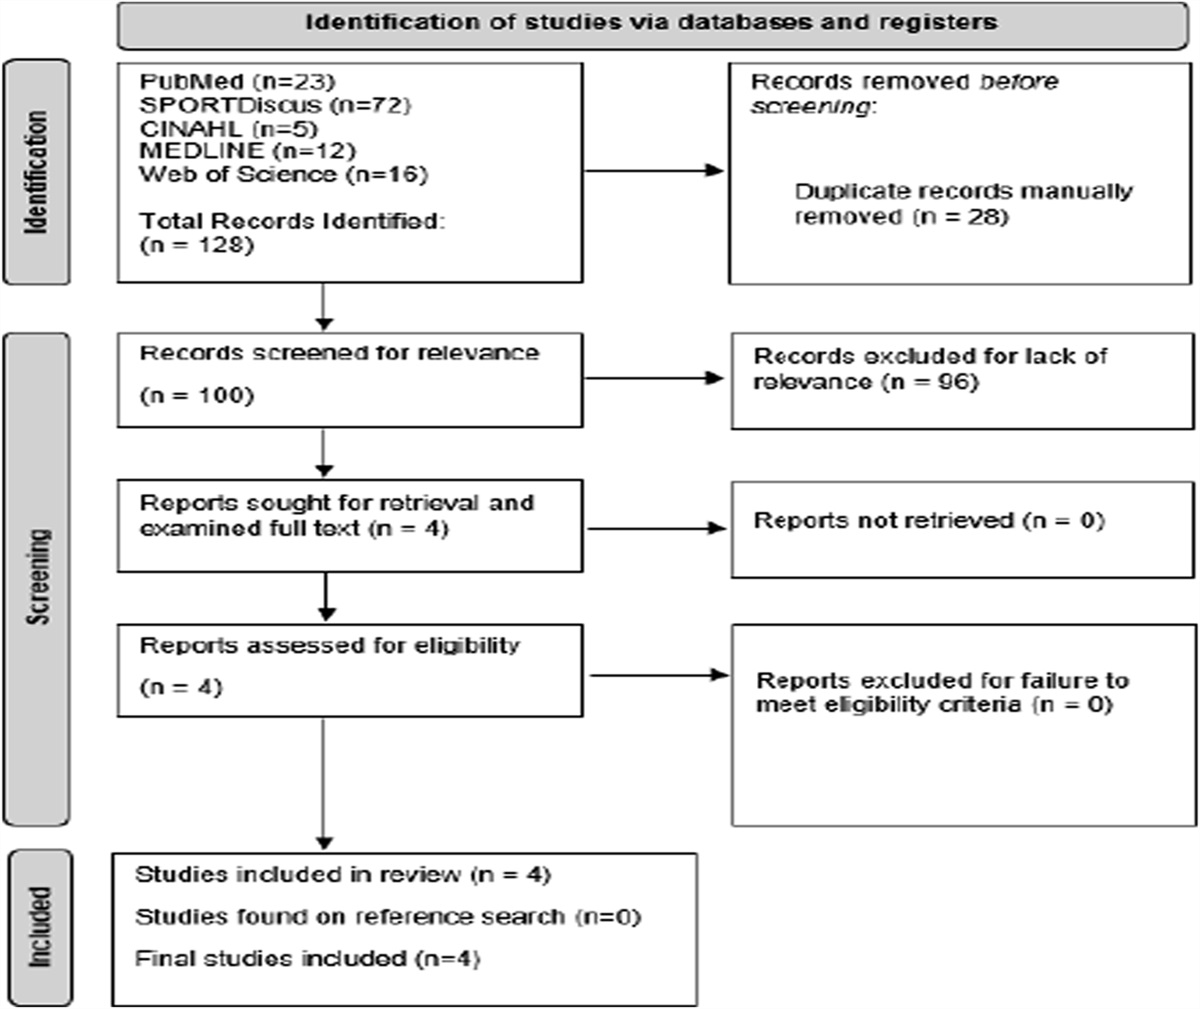 The Utilization of Preoperative Steroids Safely Decreases the Risk of Postoperative Delirium in Geriatric Patients After Hip Fracture Surgery: A Systematic Review and Meta-analysis of Randomized Controlled Trials